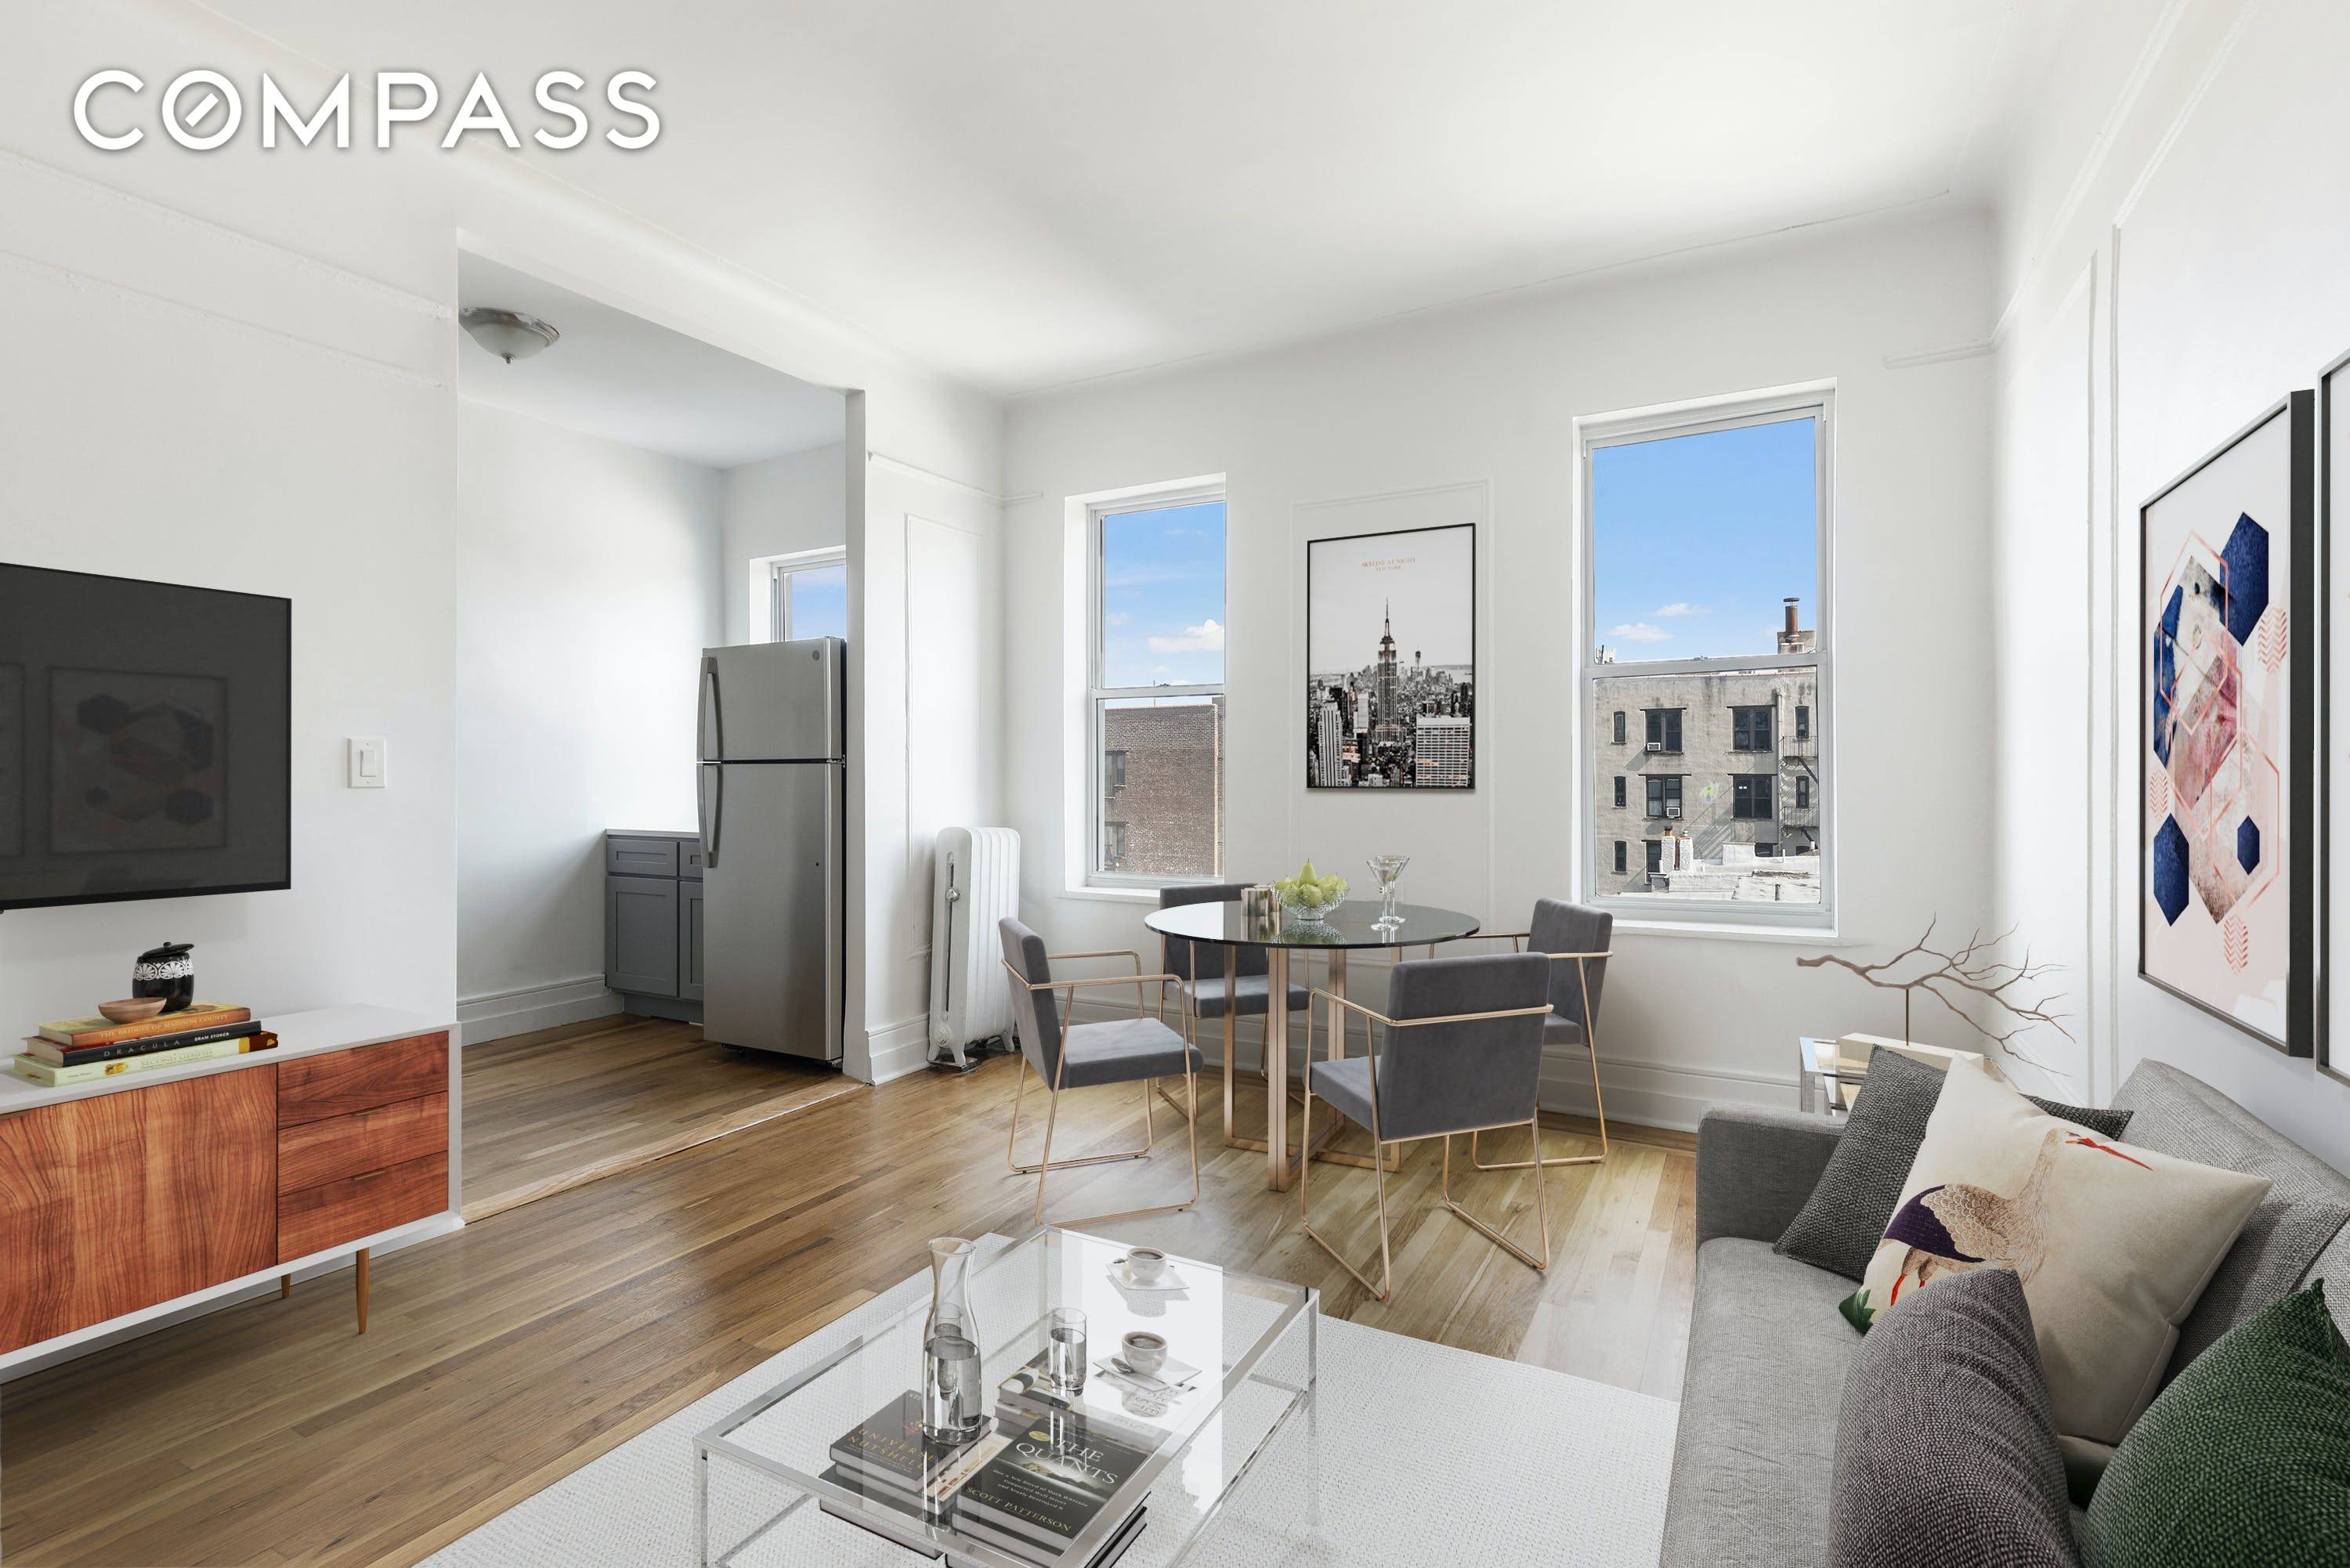 Park Slope No Fee Newly Renovated 1BD 1BA Home with Expansive Layout, Large Bedroom, Hardwood Floors, Windowed Kitchen, Stainless Steel Appliances including D W and M W, Tall Ceilings and ...